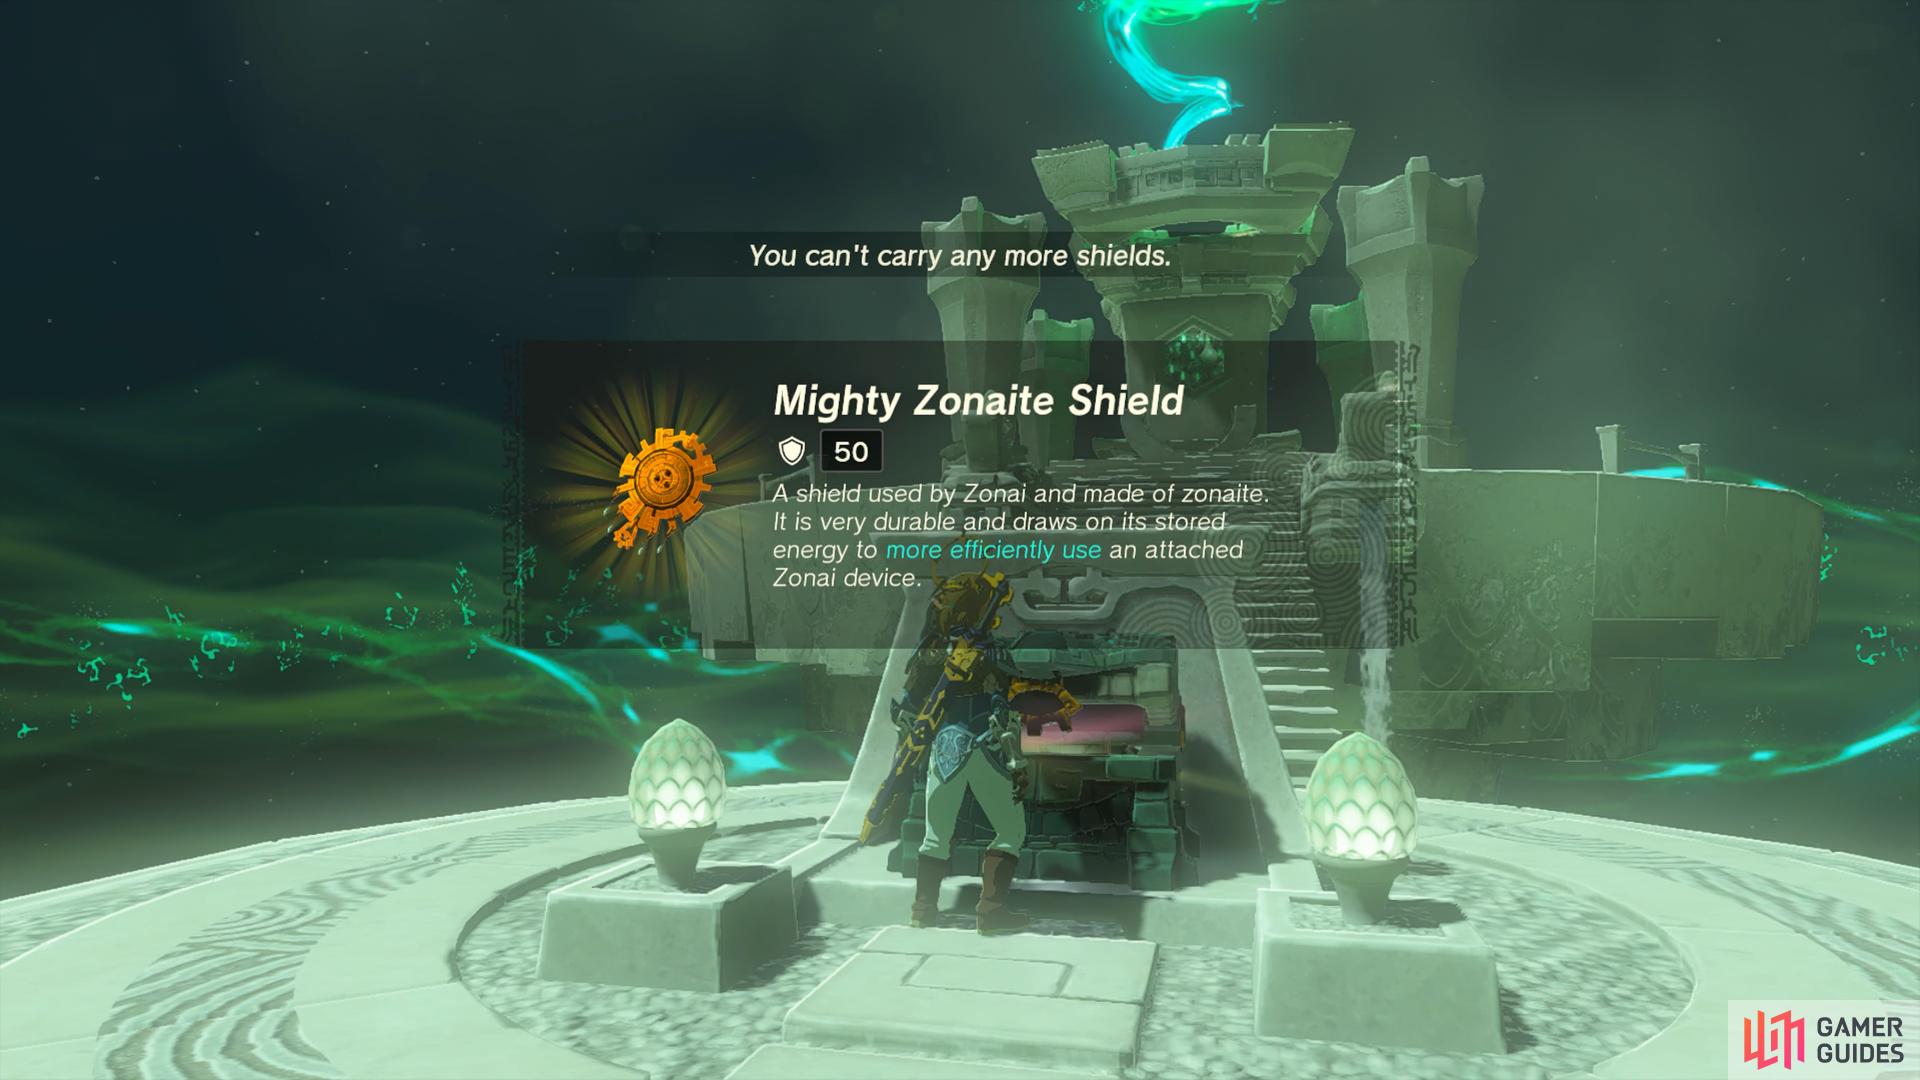 Receiving a shield from the shrine’s chest